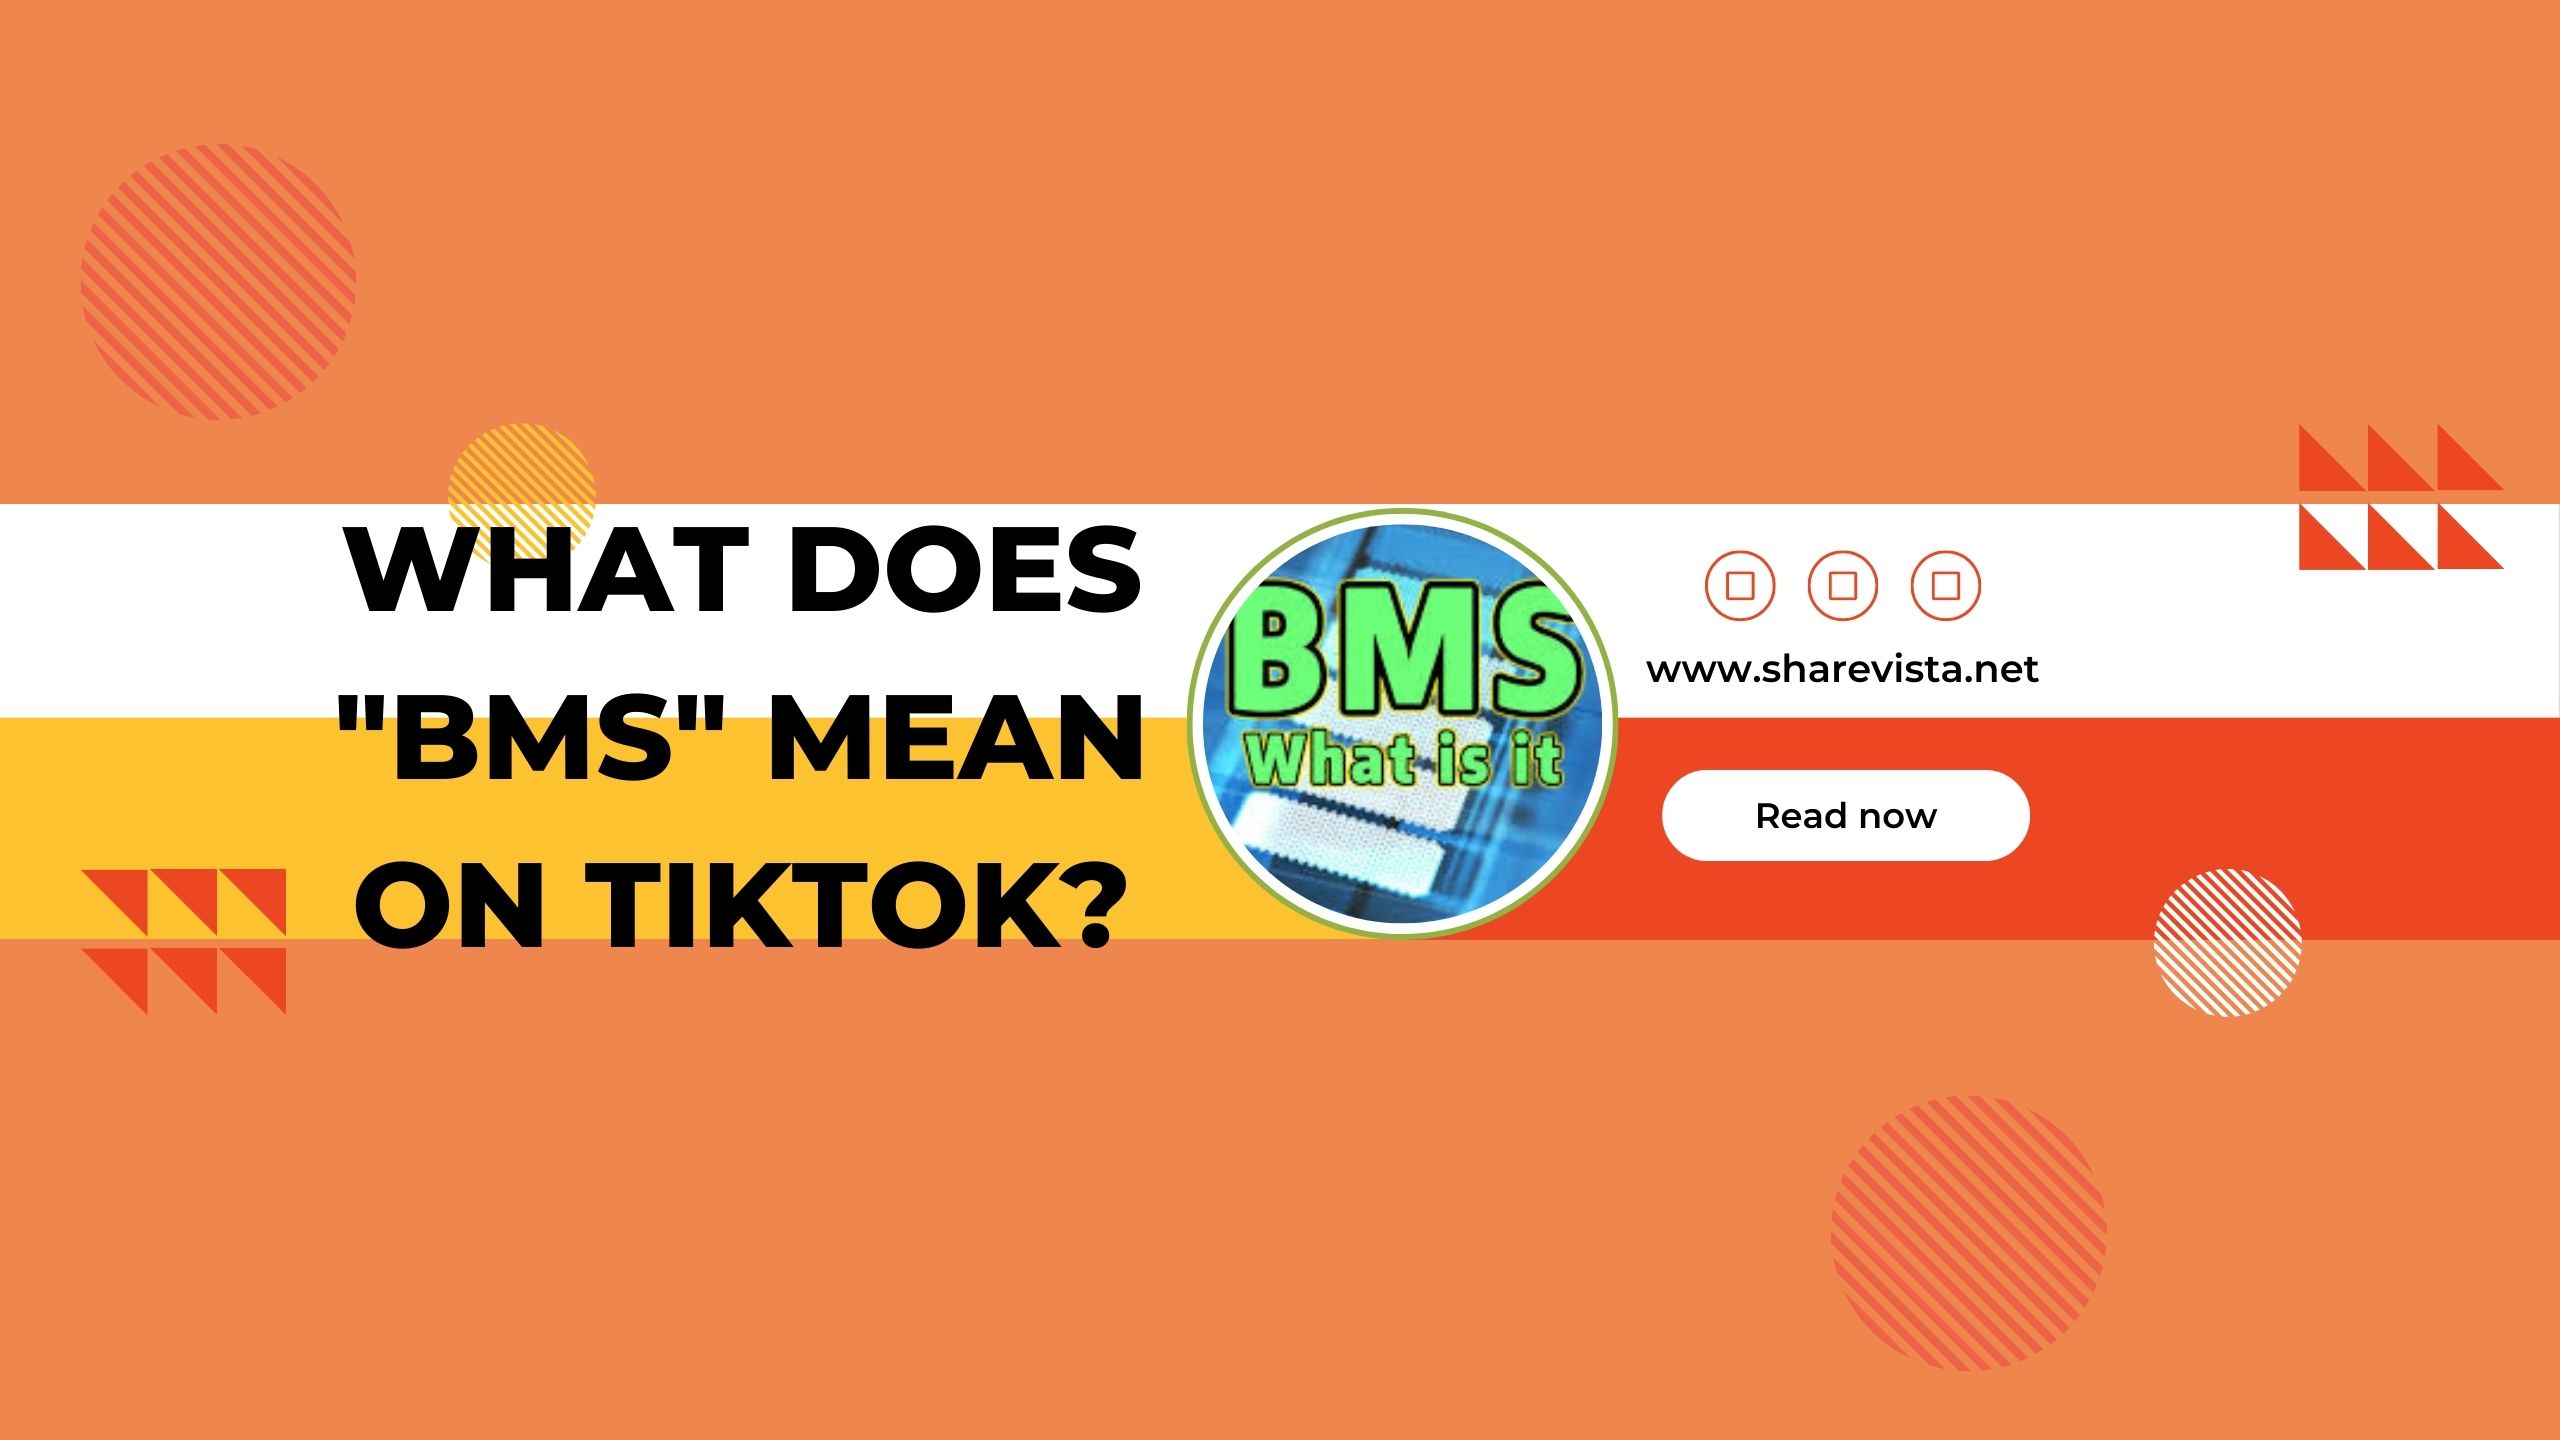 What does "BMS" mean on TikTok?